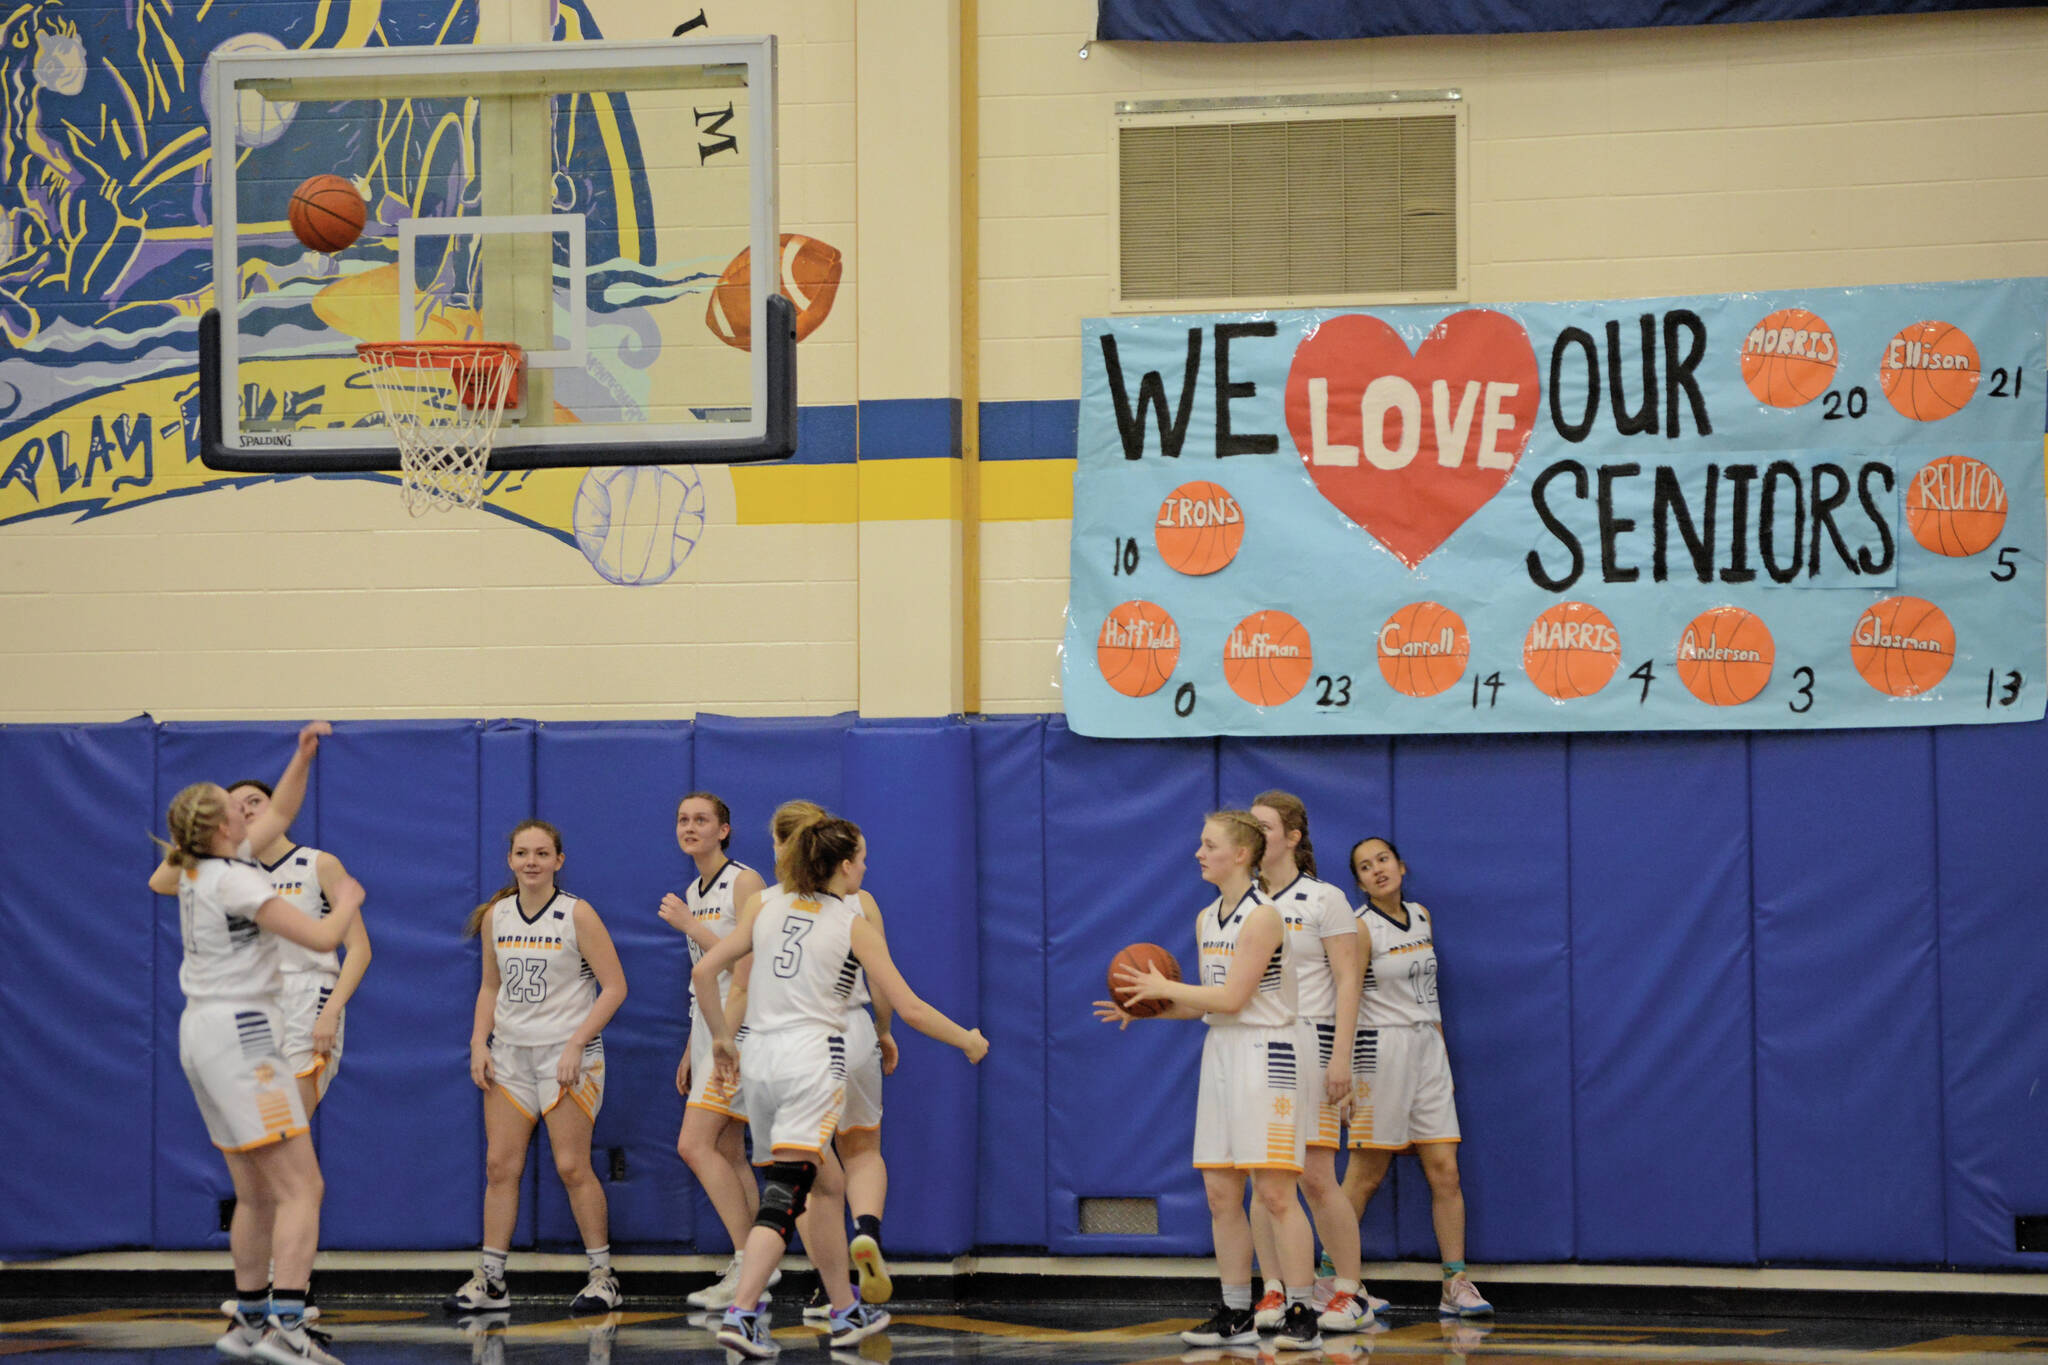 The Lady Mariners warm up in a game against the Nikiski Bulldogs during Senior Night on Friday, Feb. 25, 2022, at the Alice Witte Gym at Homer High School in Homer, Alaska. (Photo by Michael Armstrong/Homer News)